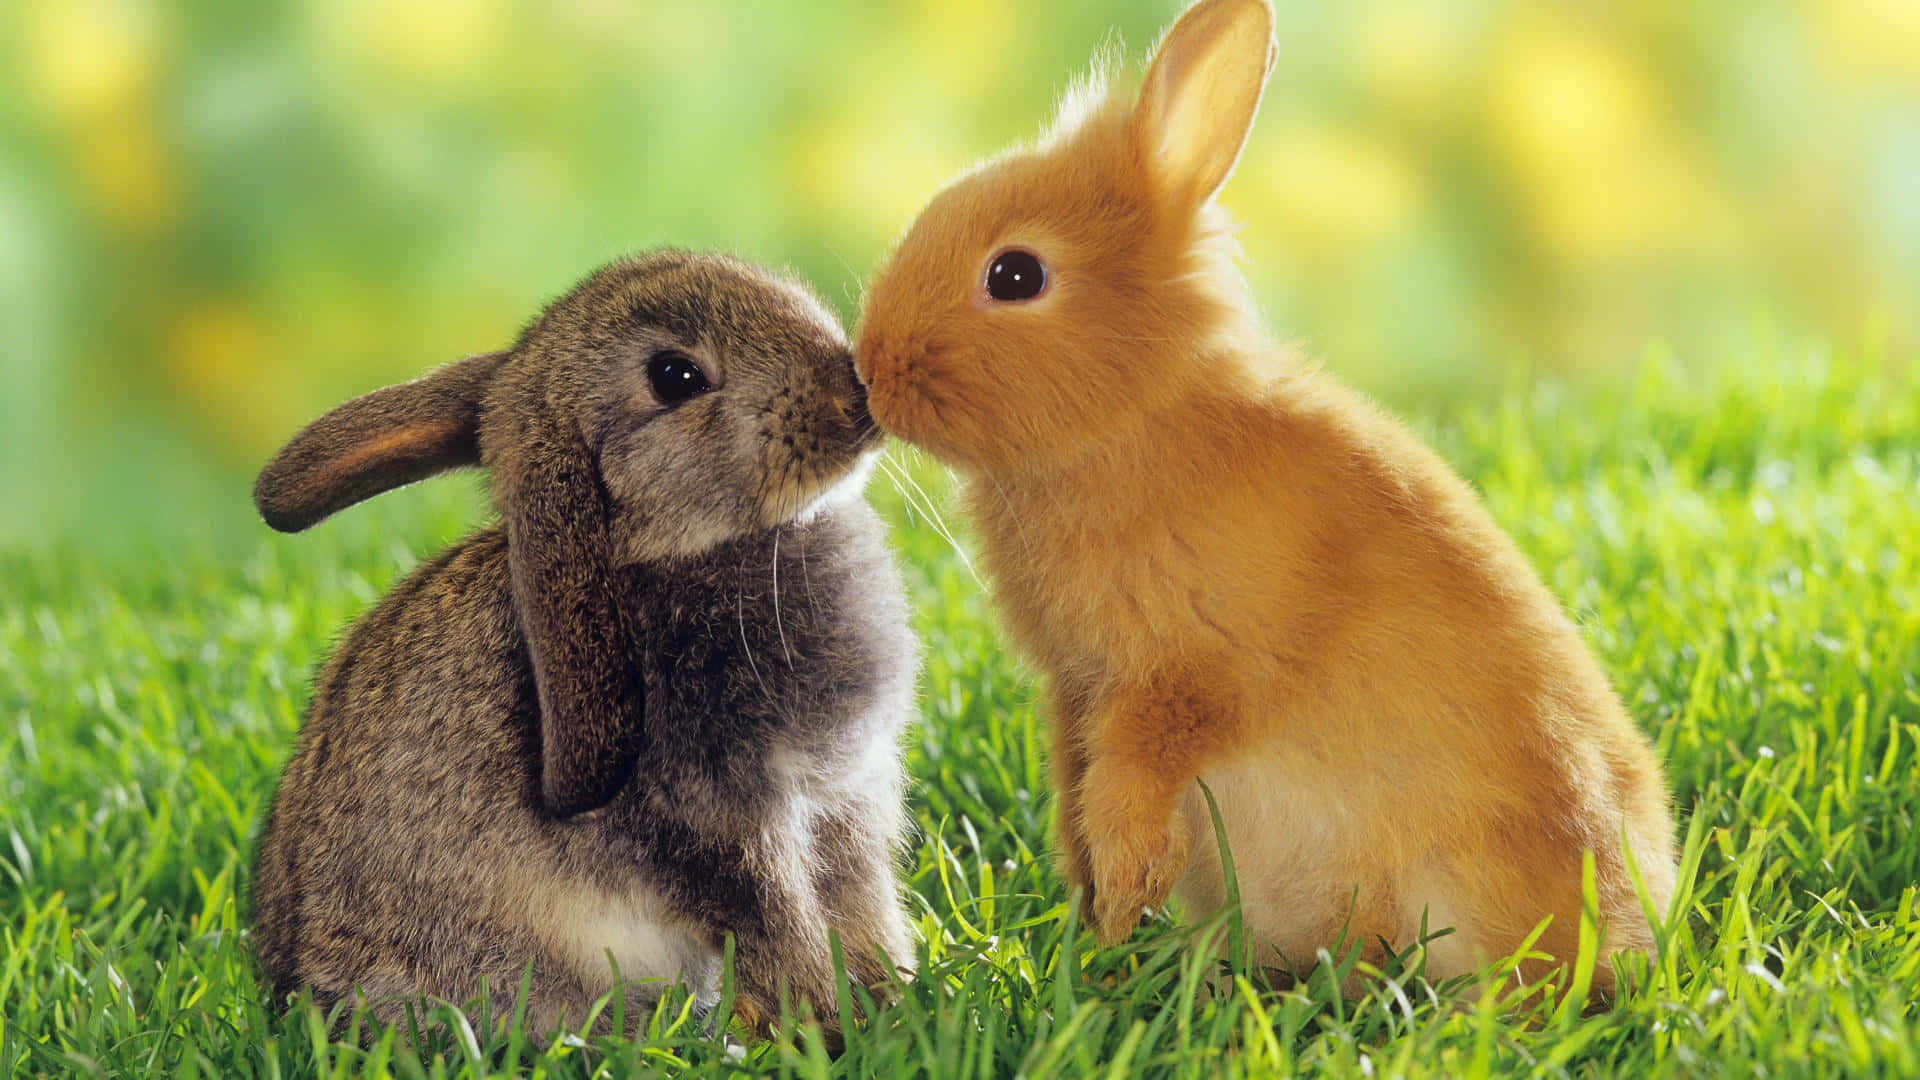 Two Rabbits Kissing In The Grass Wallpaper